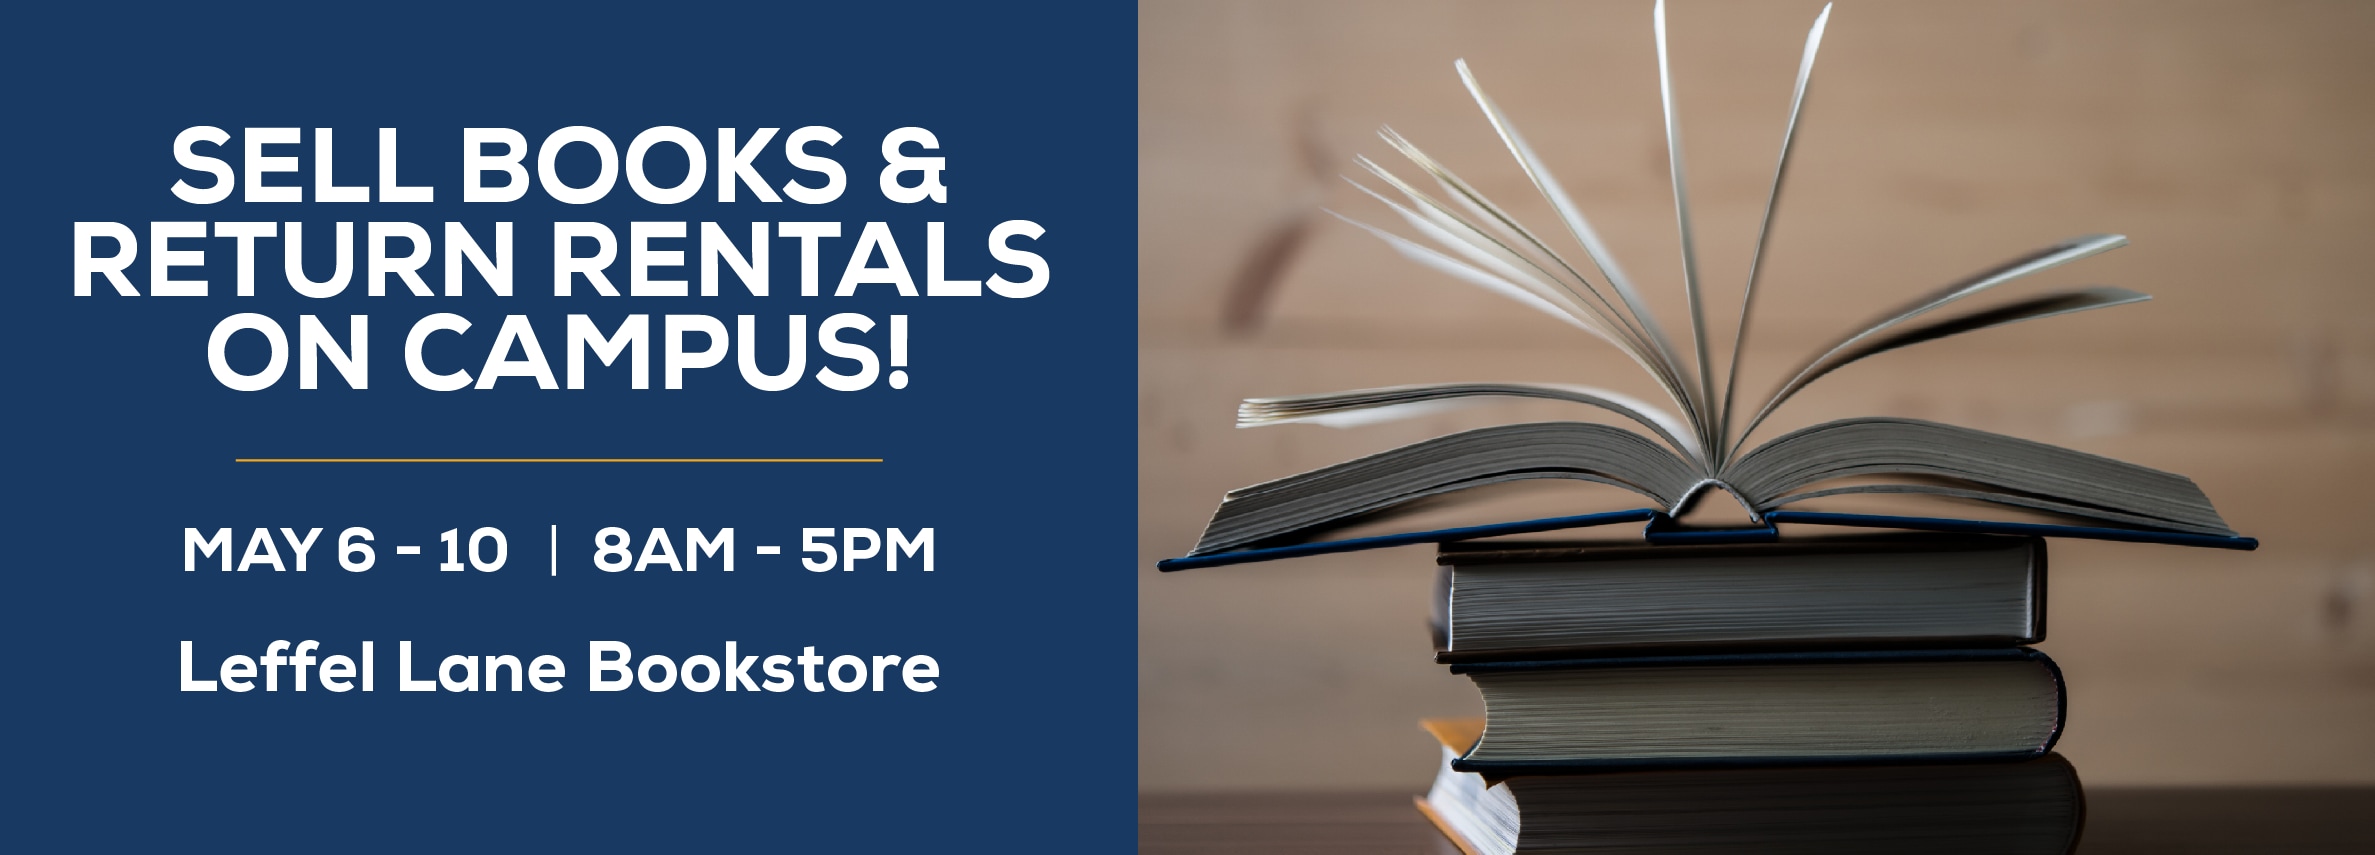 Sell your books and return your rentals! May 6 - 10. 8am to 5pm. Leffel Lane Bookstore.